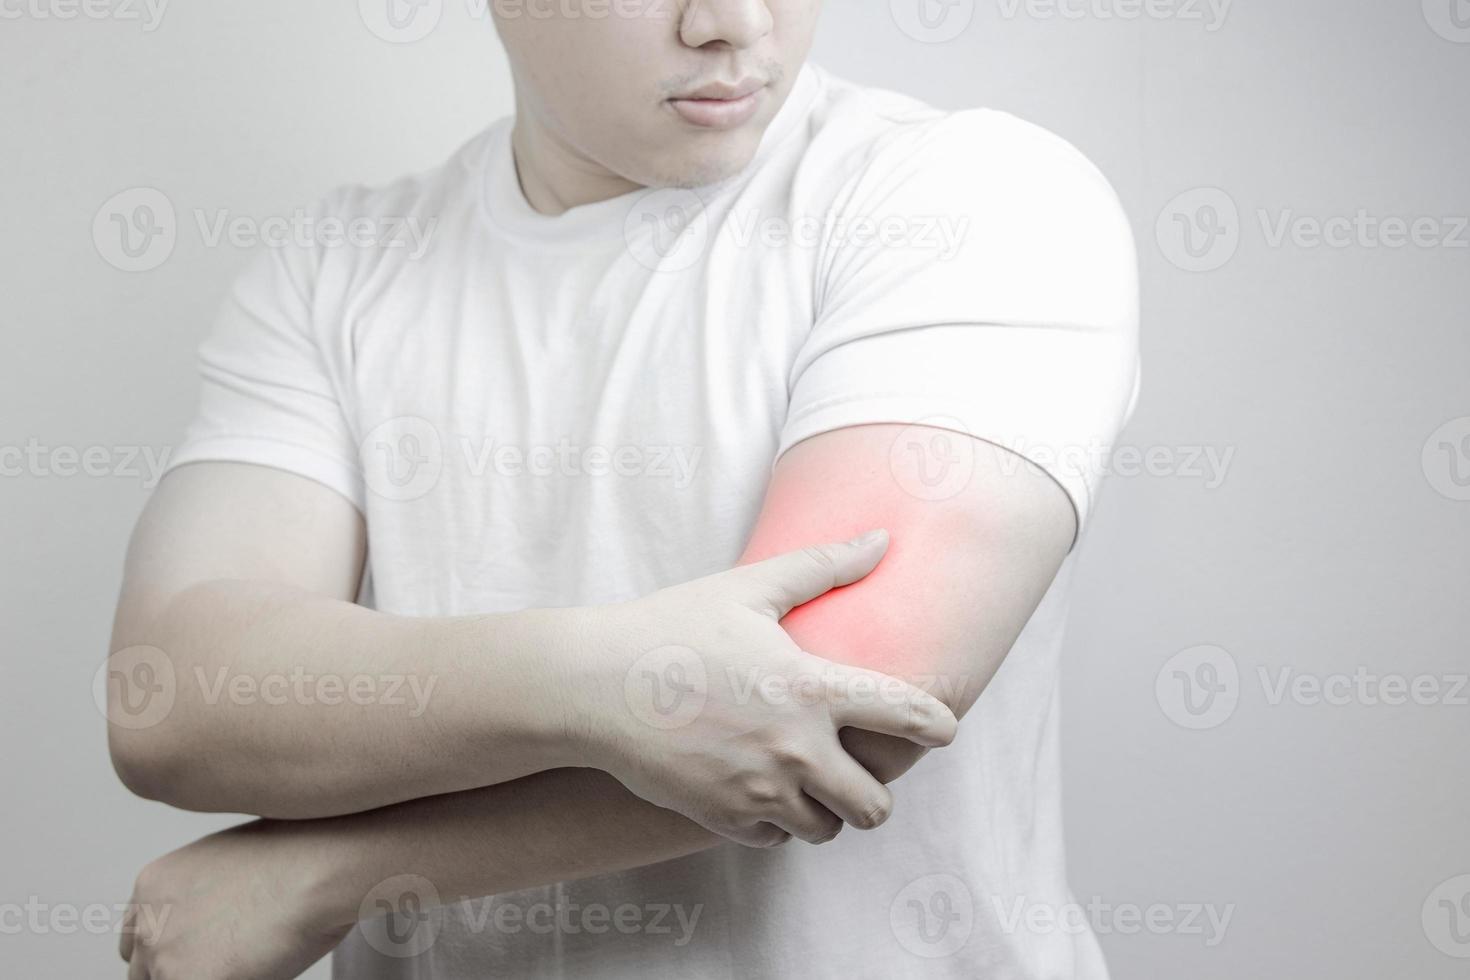 Muscle pain, arm pain, burning sensation, weak muscles, Office syndrome, Muscle tear caused by exercise, red inflamed zone. man having arm pain on a gray background. concept of healthcare photo